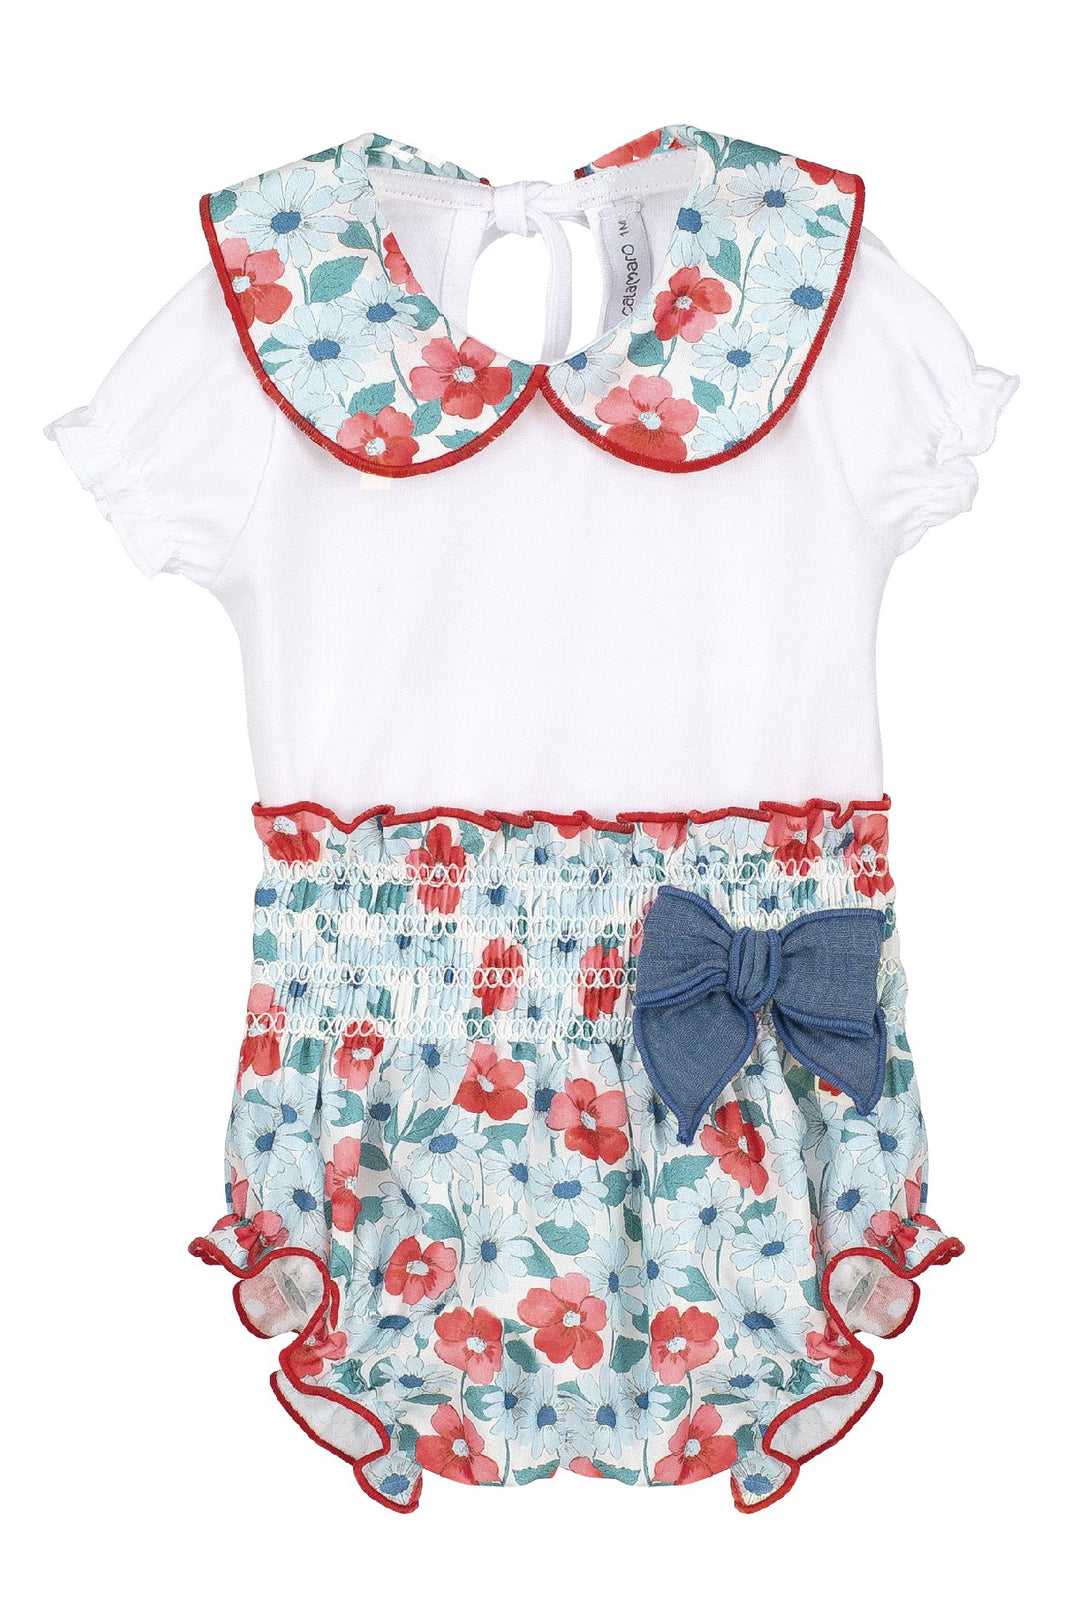 Calamaro "Fallon" Red & Blue Floral Blouse & Bloomers | Millie and John